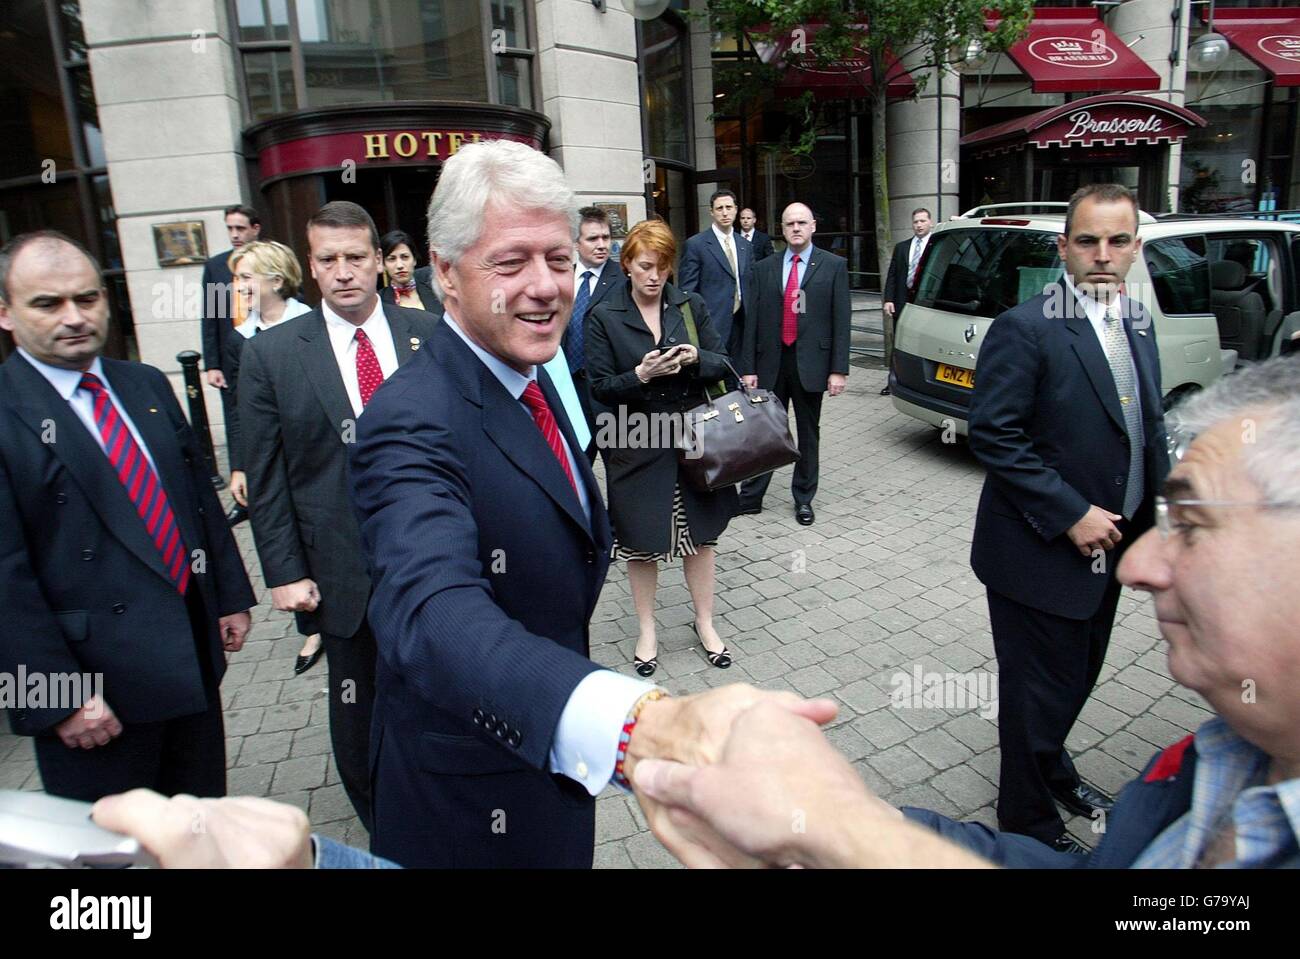 Former US President Bill Clinton arrives at the Europa hotel in Belfast. President Clinton met Paul Murphy, Secretary of State for Northern Ireland Ulster Unionist leader David Trimble, Sinn Fein President Gerry Adams, SDLP leader Mark Durkan and a delegation from the Democratic Unionist Party, led by deputy leader Peter Robinson in a bid to urge them to back devolution in Northern Ireland. Stock Photo